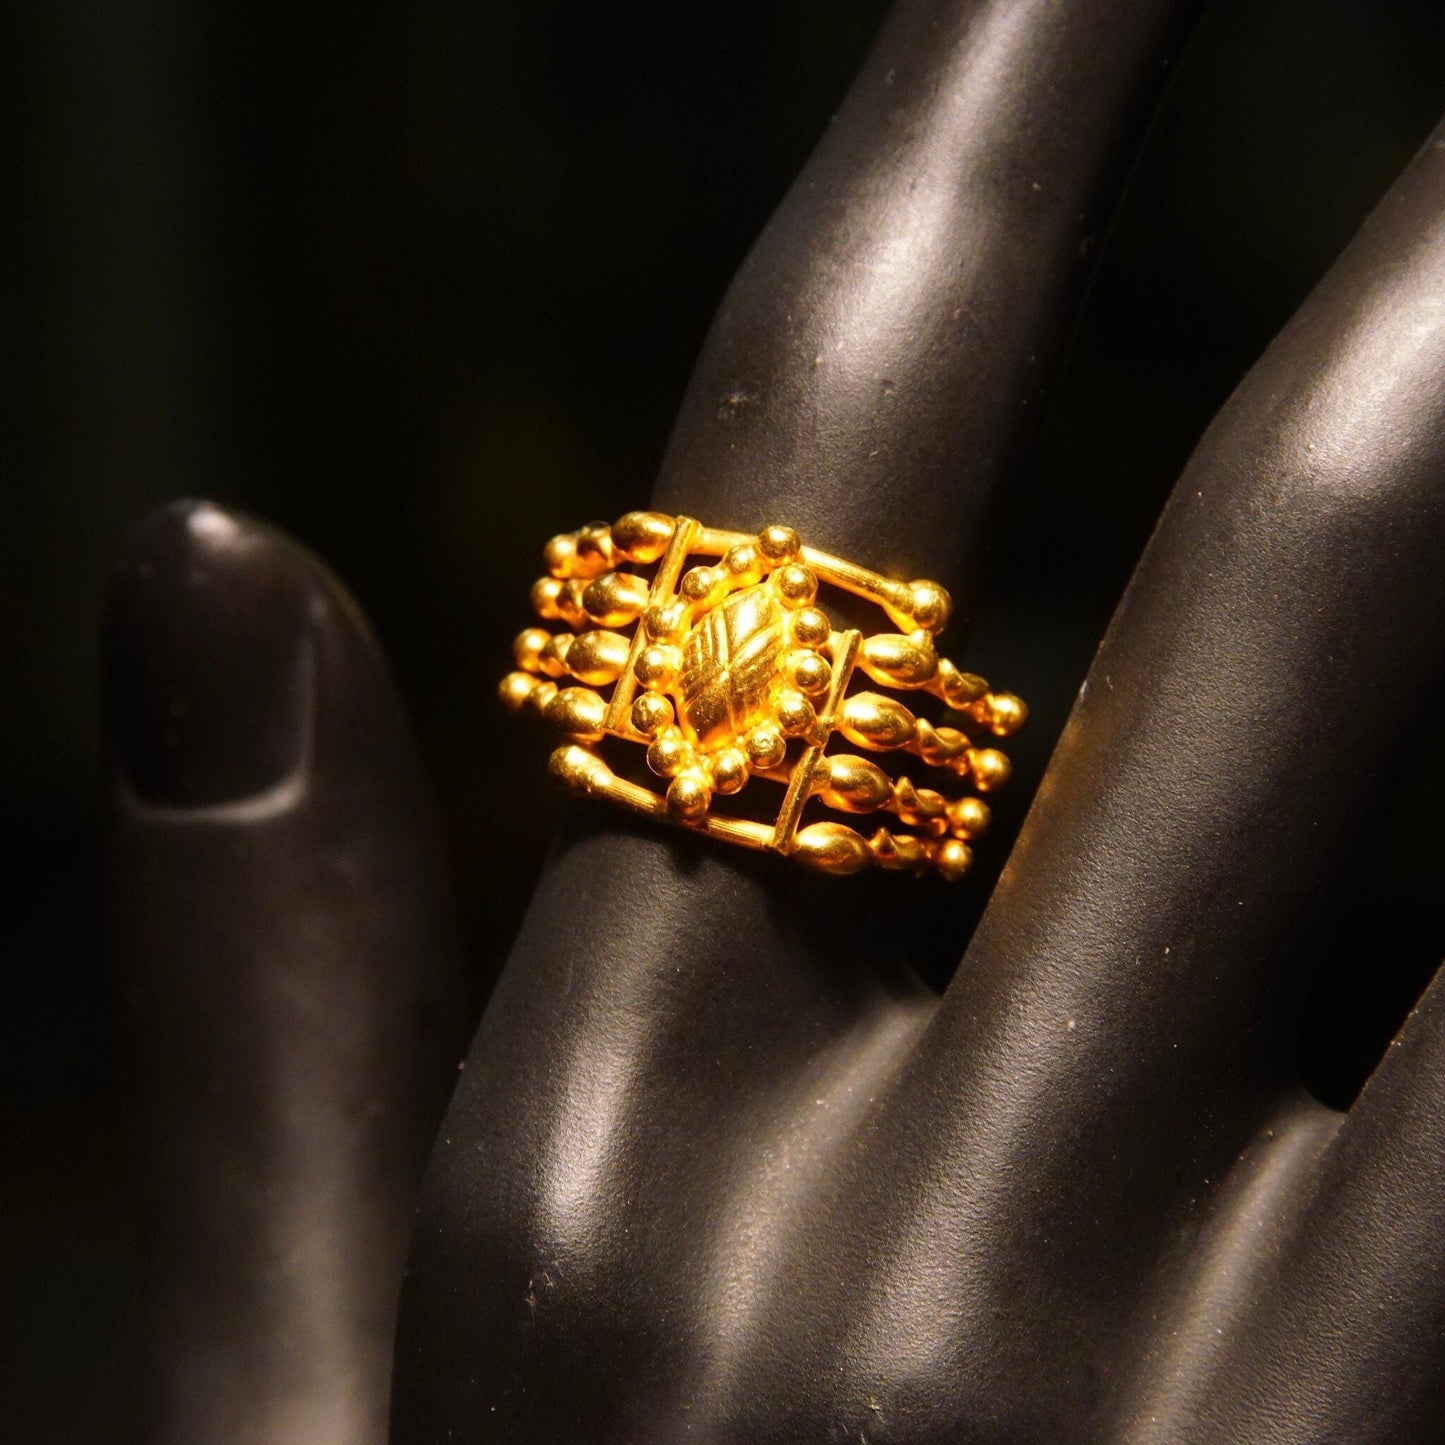 Vintage handmade 22KT yellow gold ring with intricate wire wrap design and bamboo-inspired gold drop accents on a dark silk fabric background, showcasing bohemian style craftsmanship in a close-up view, ring size 6 3/4 US.